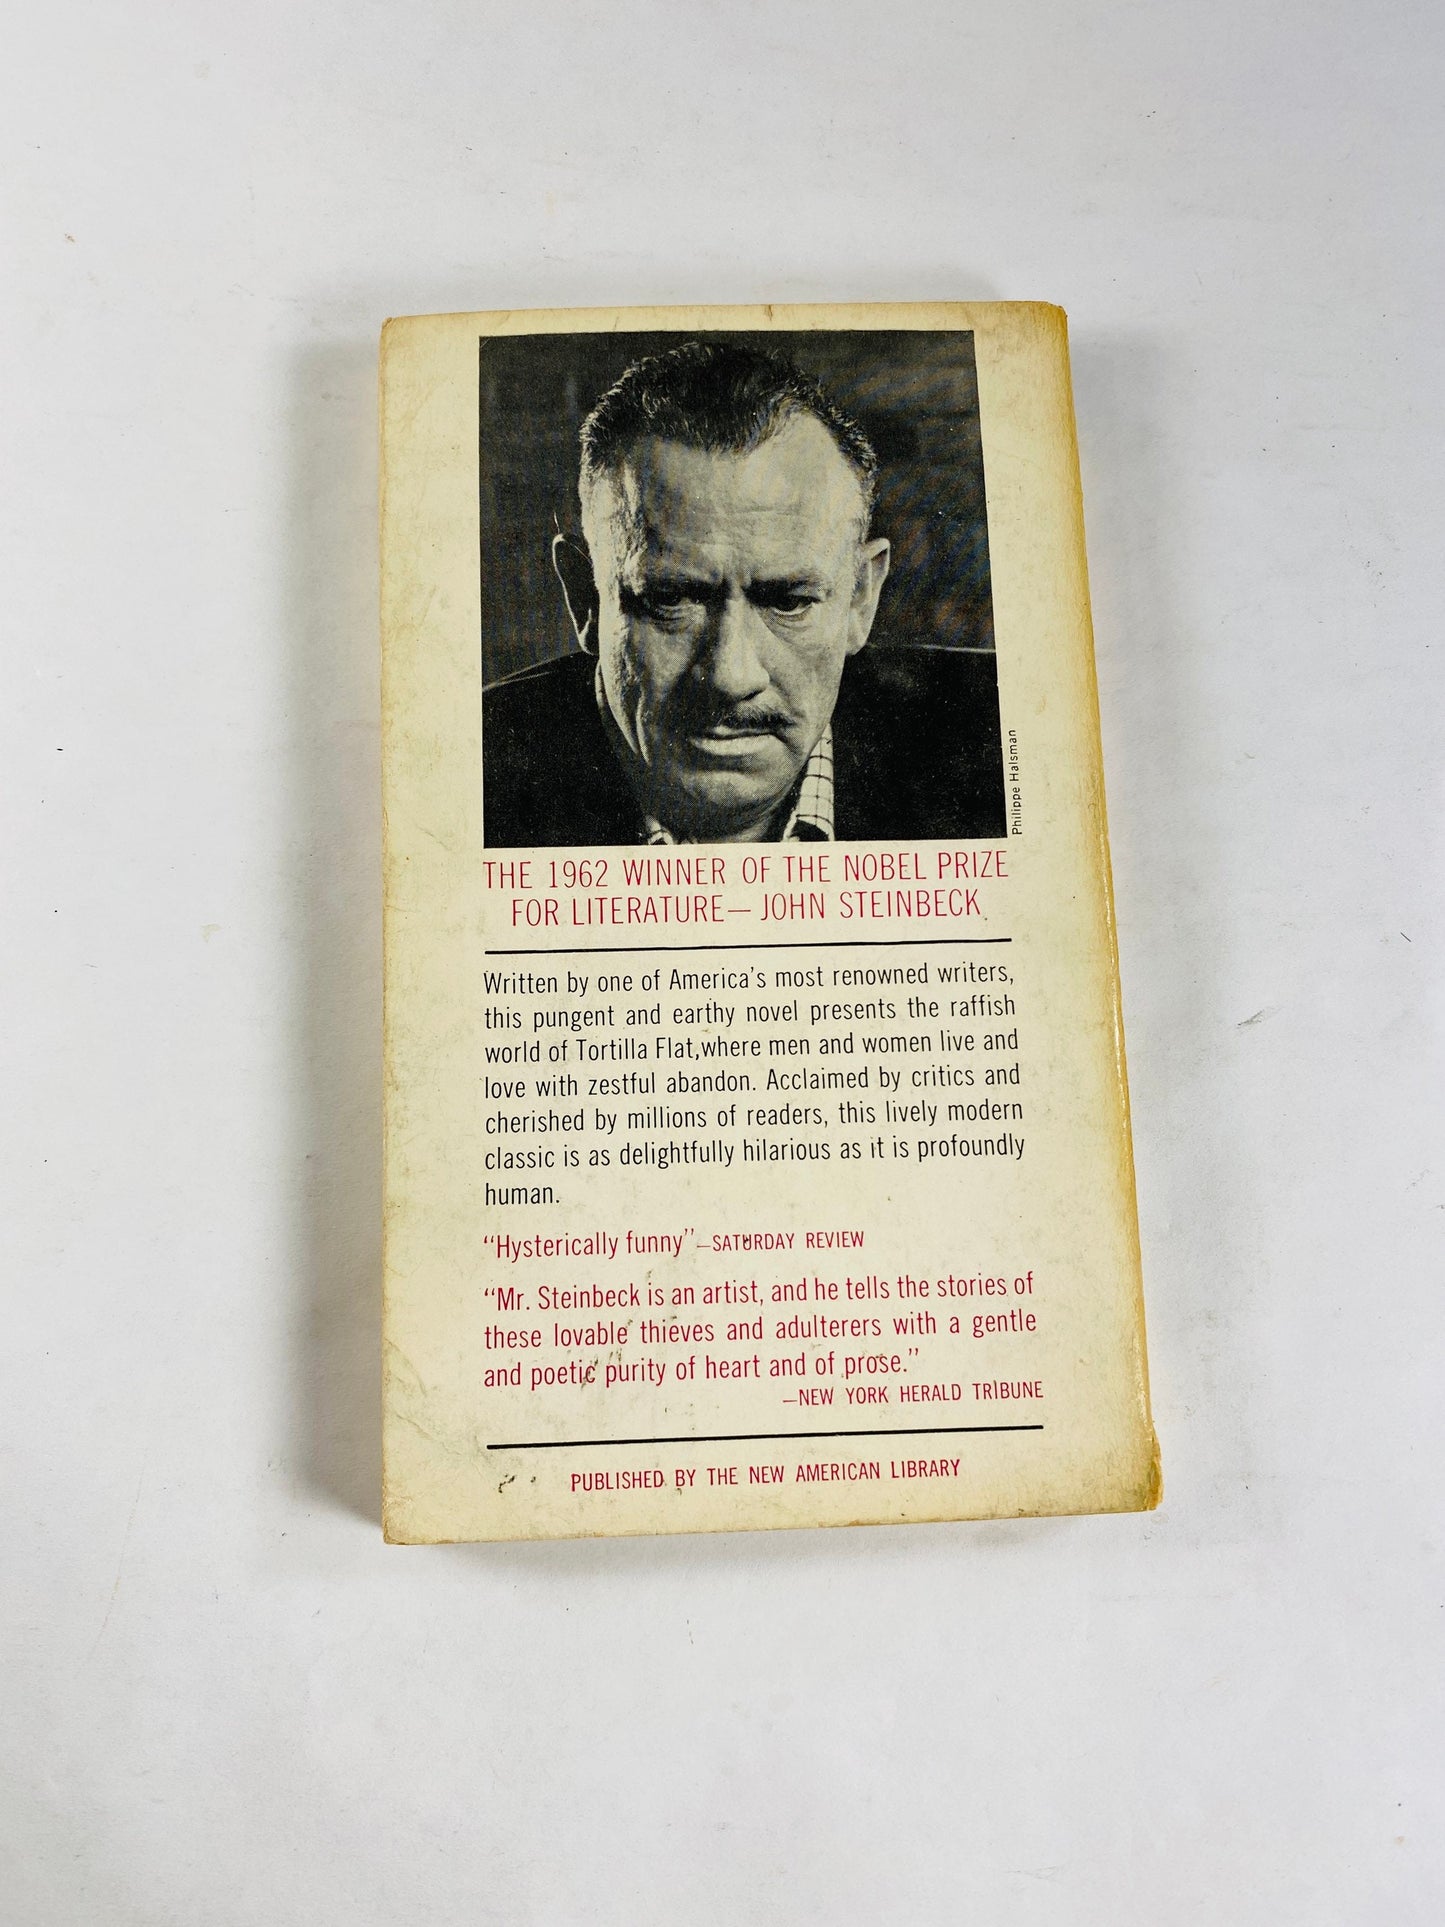 John Steinbeck Tortilla Flat vintage Signet paperback book circa 1963 Men and women who live with zestful abandon. New American Library